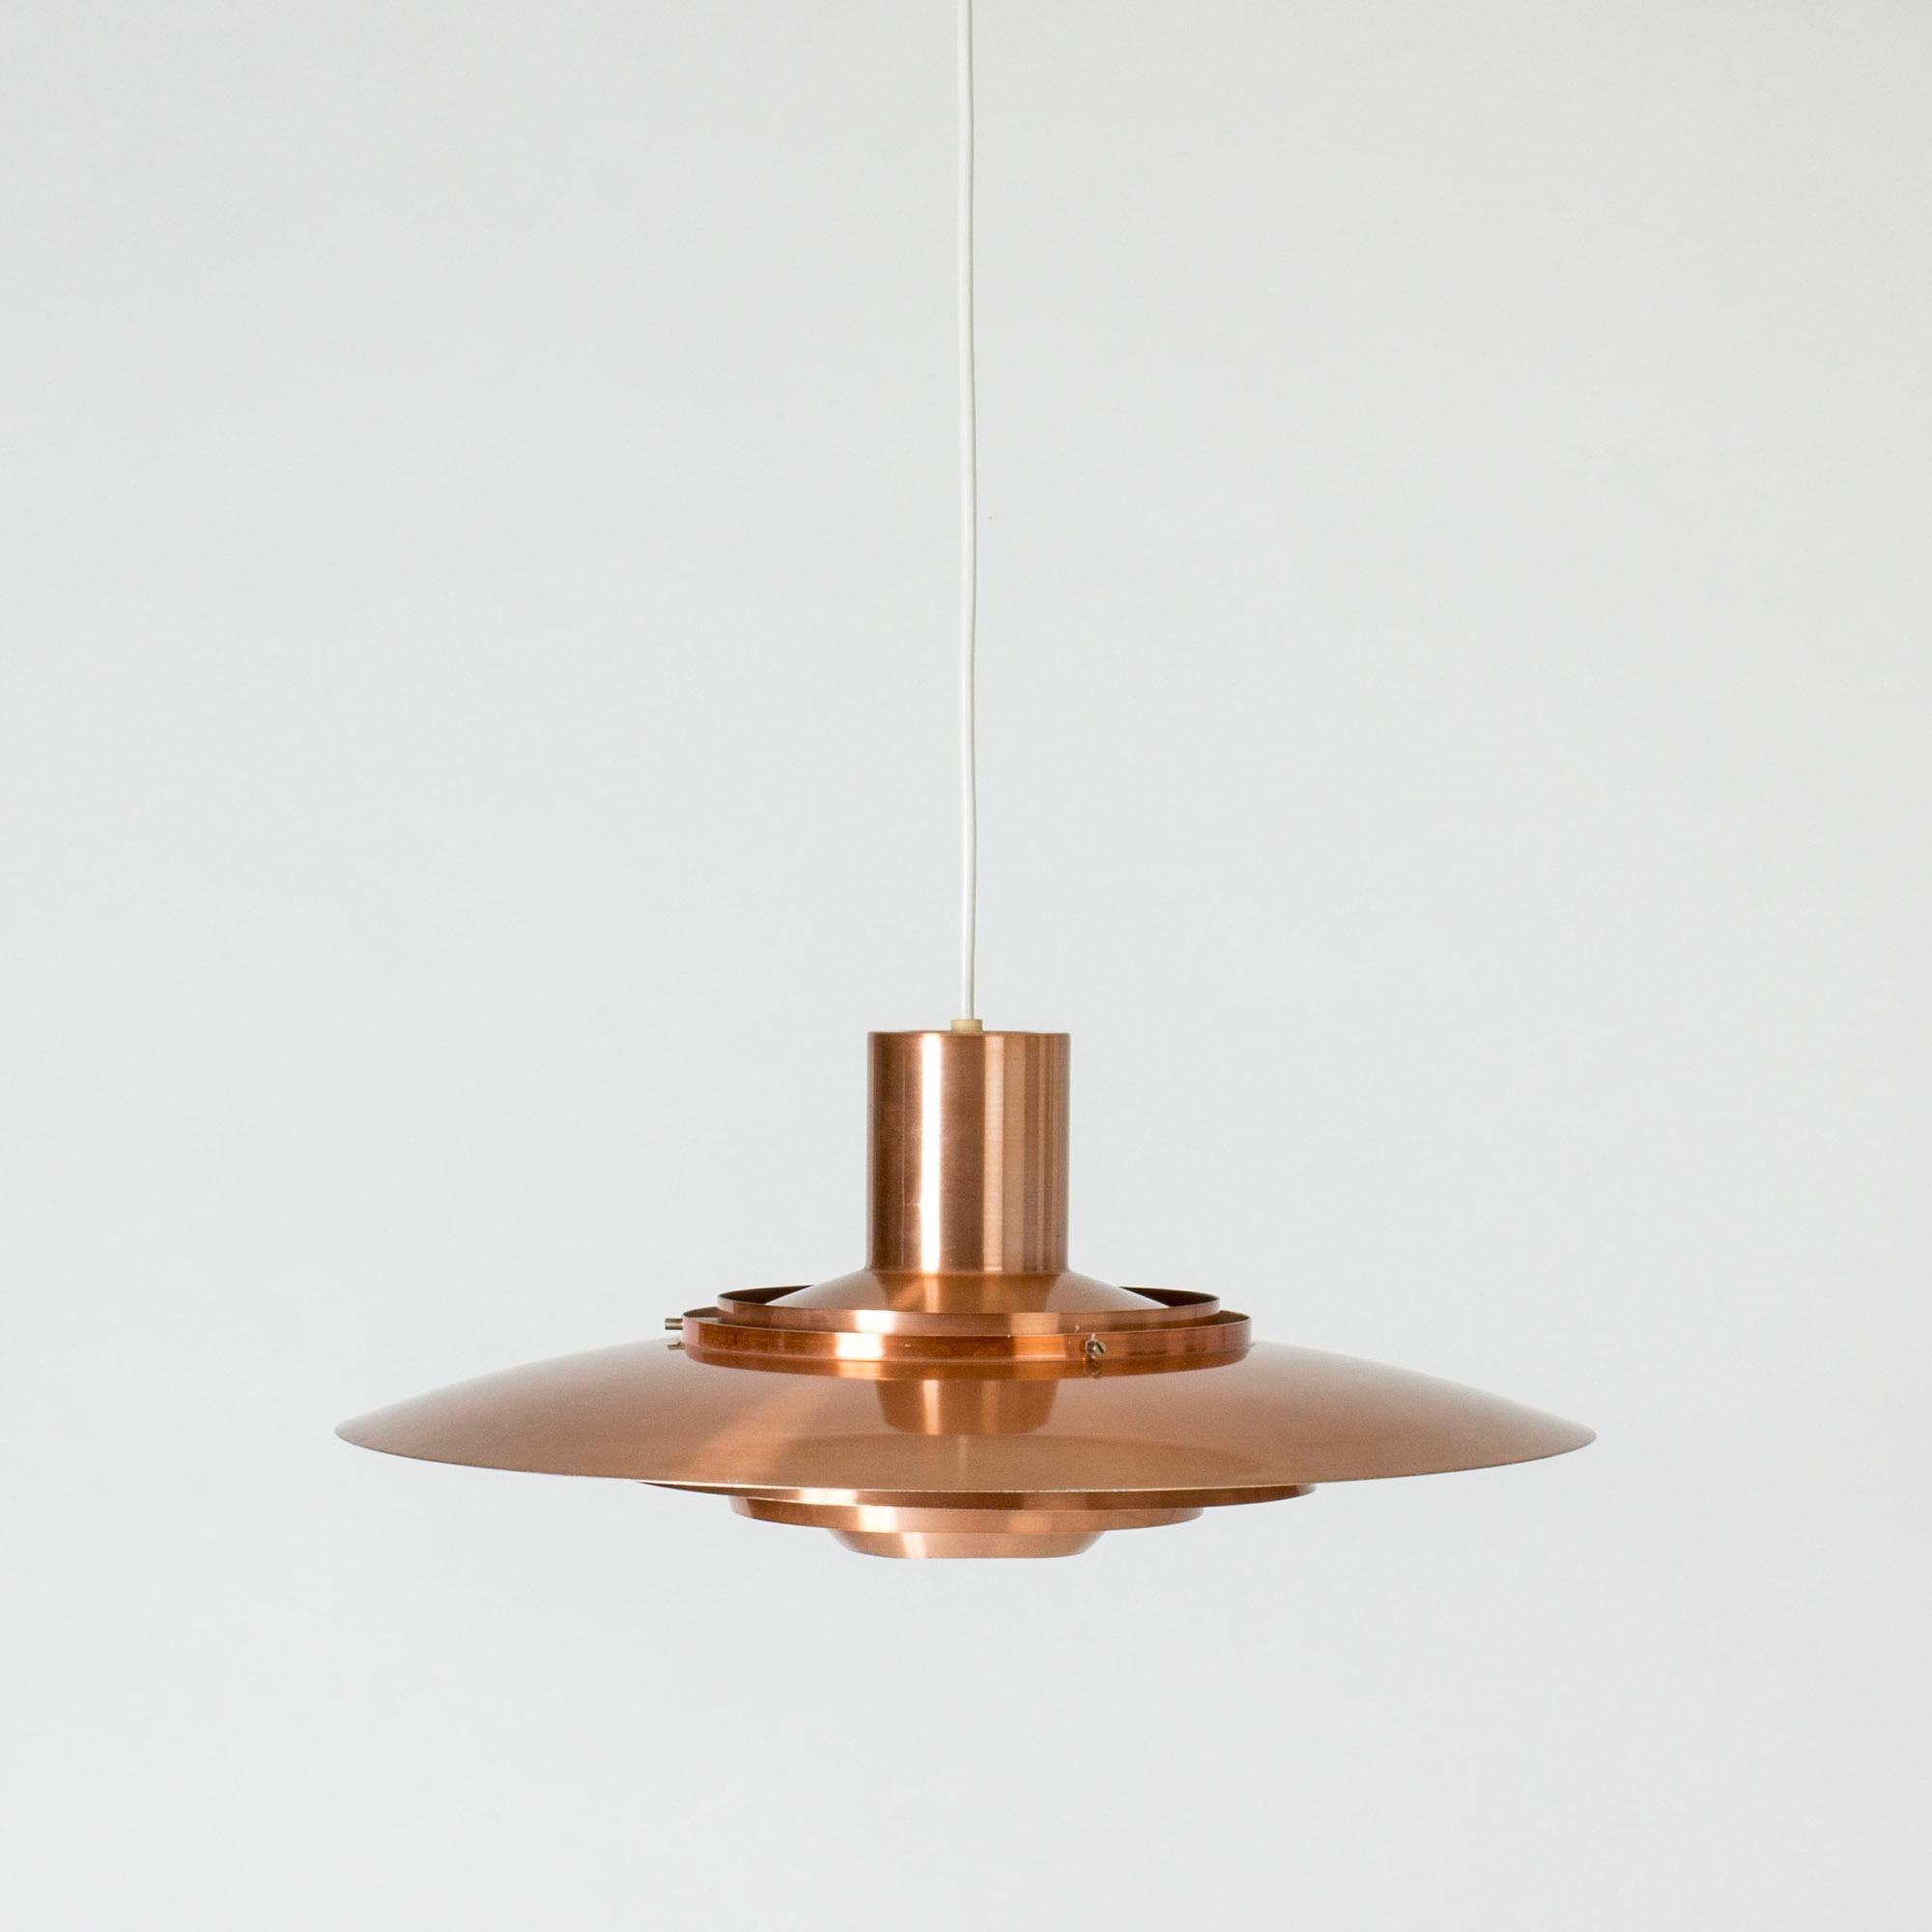 Sleek copper pendant lamp by Jørgen Kastholm and Preben Fabricius. Cool silhouette and wonderful, warm glow.